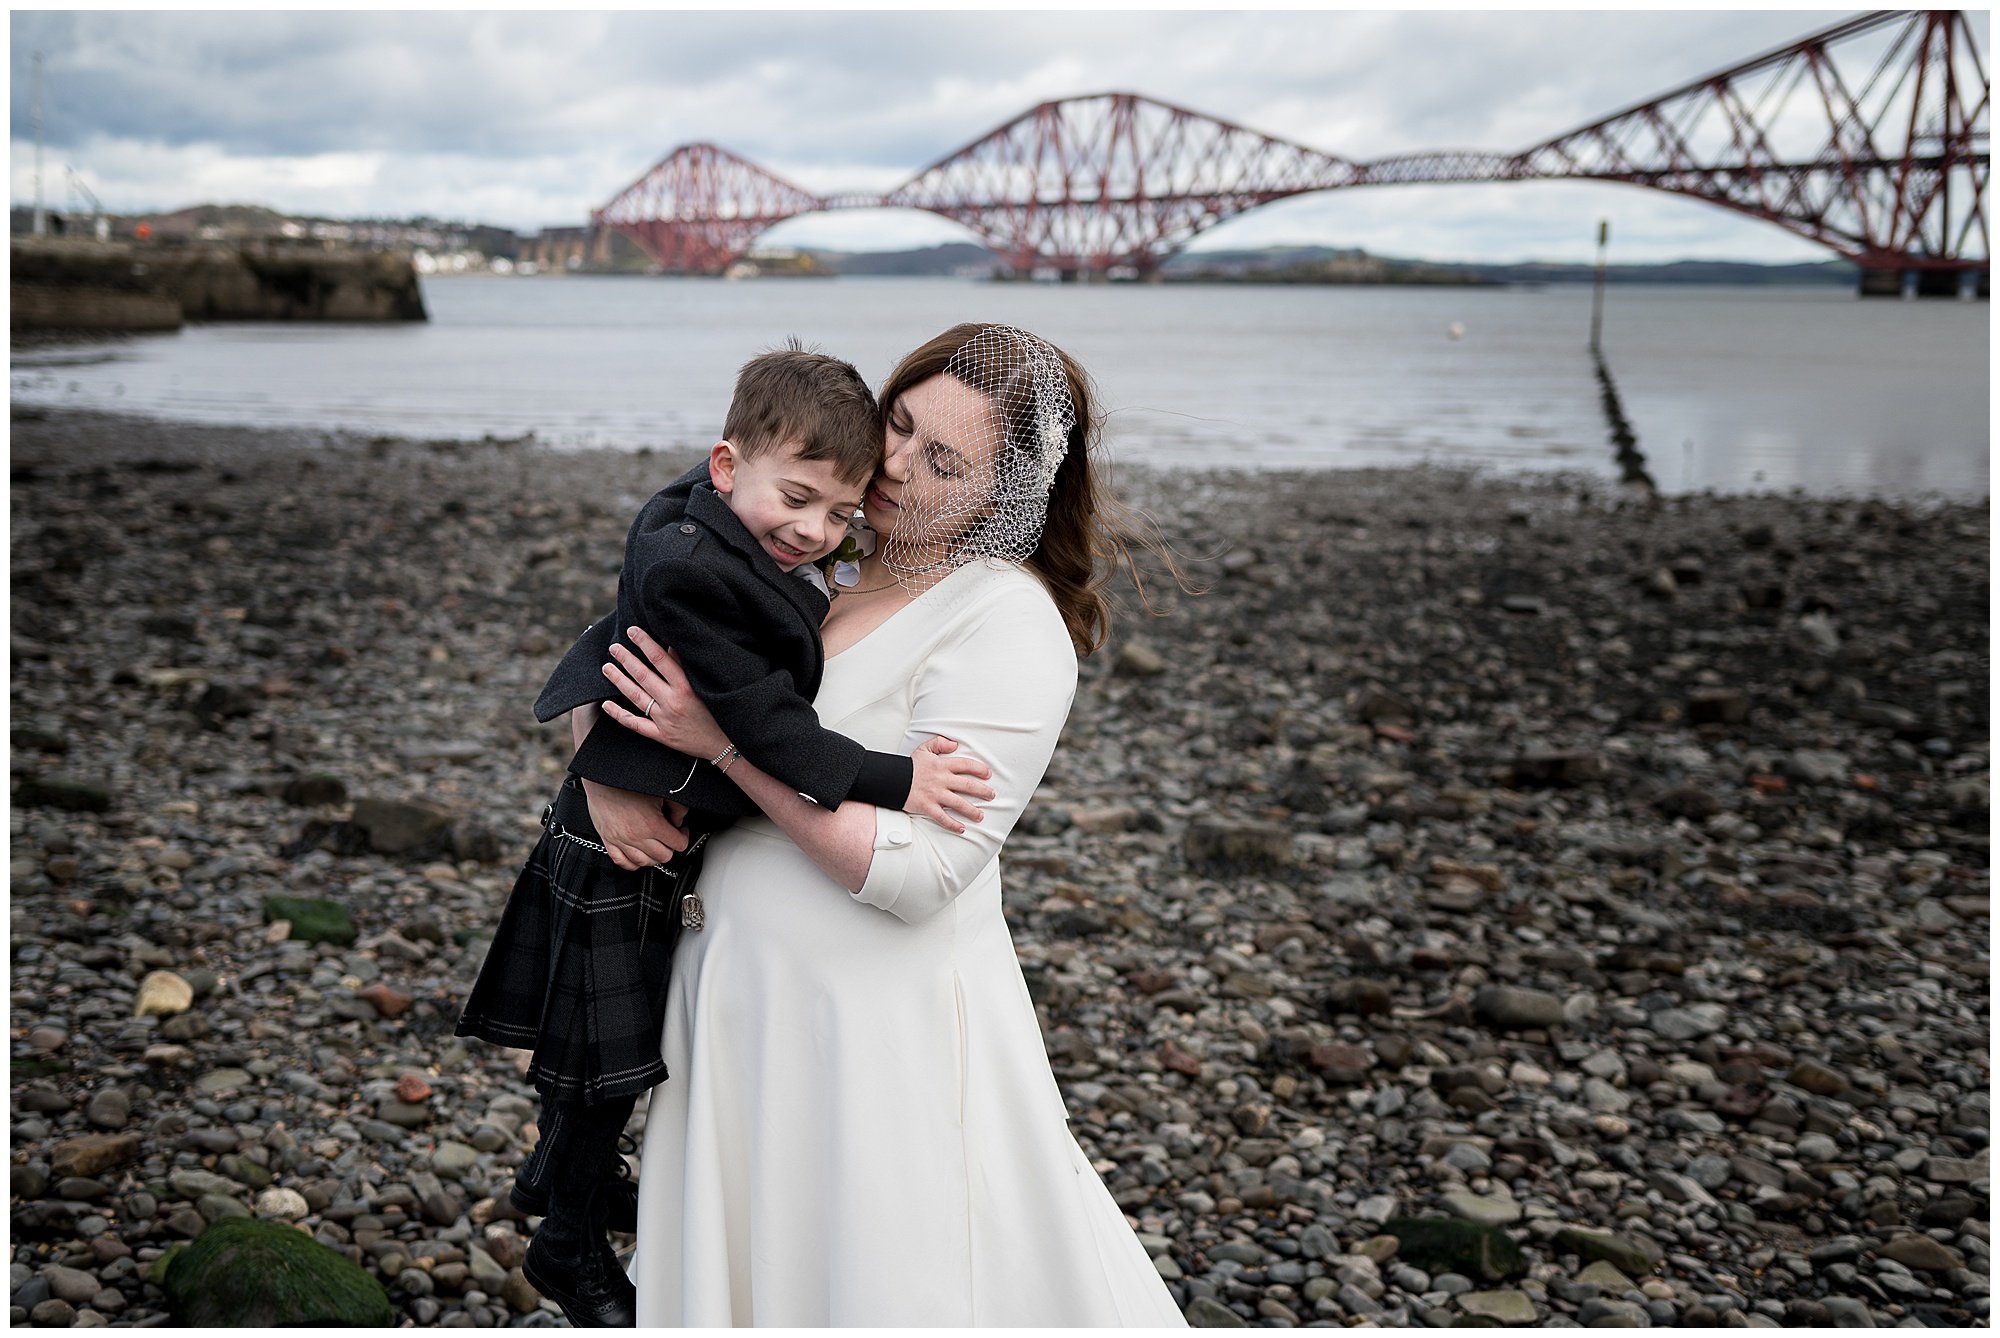 Over the years, I have loved photographing weddings at South Queensferry registry office.

It was a great space &amp; South Queensferry is a great place to explore on your wedding day but sadly it stopped doing weddings last year and they have moved 